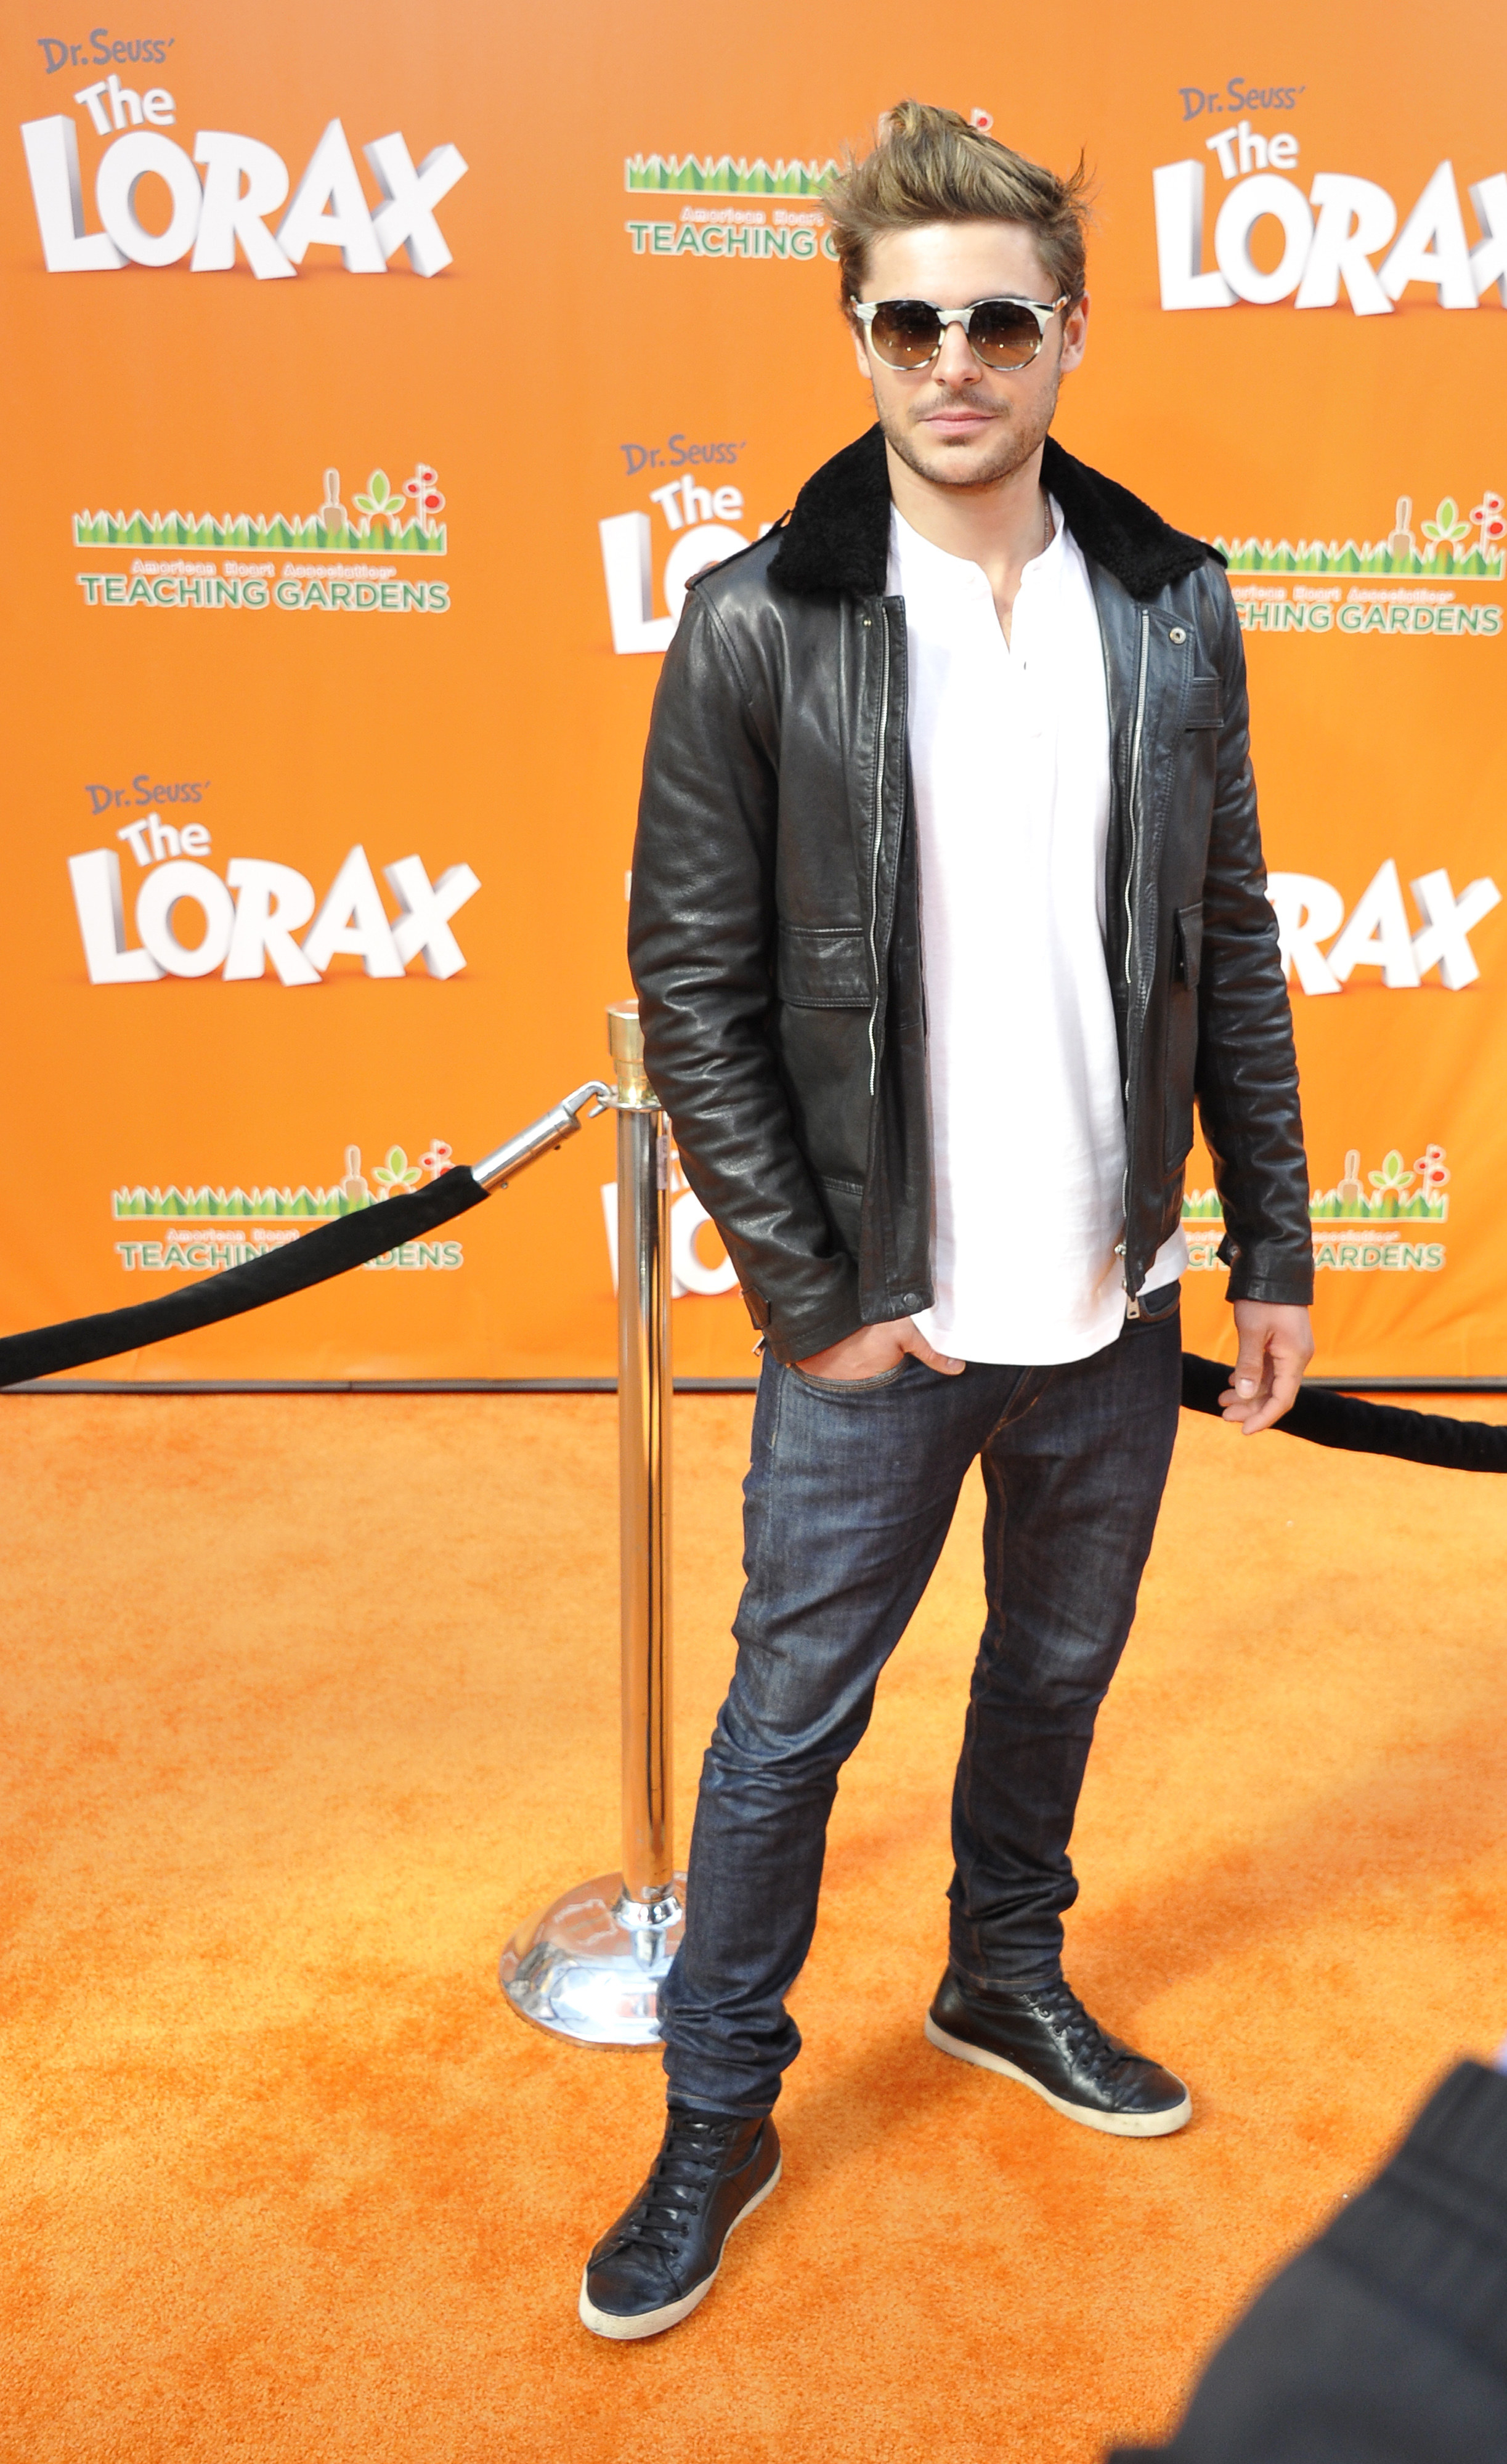 Zac Efron, wearing jeans and a black jacket with sunglasses, poses in front of a Lorax backdrop with his hand in his pocket